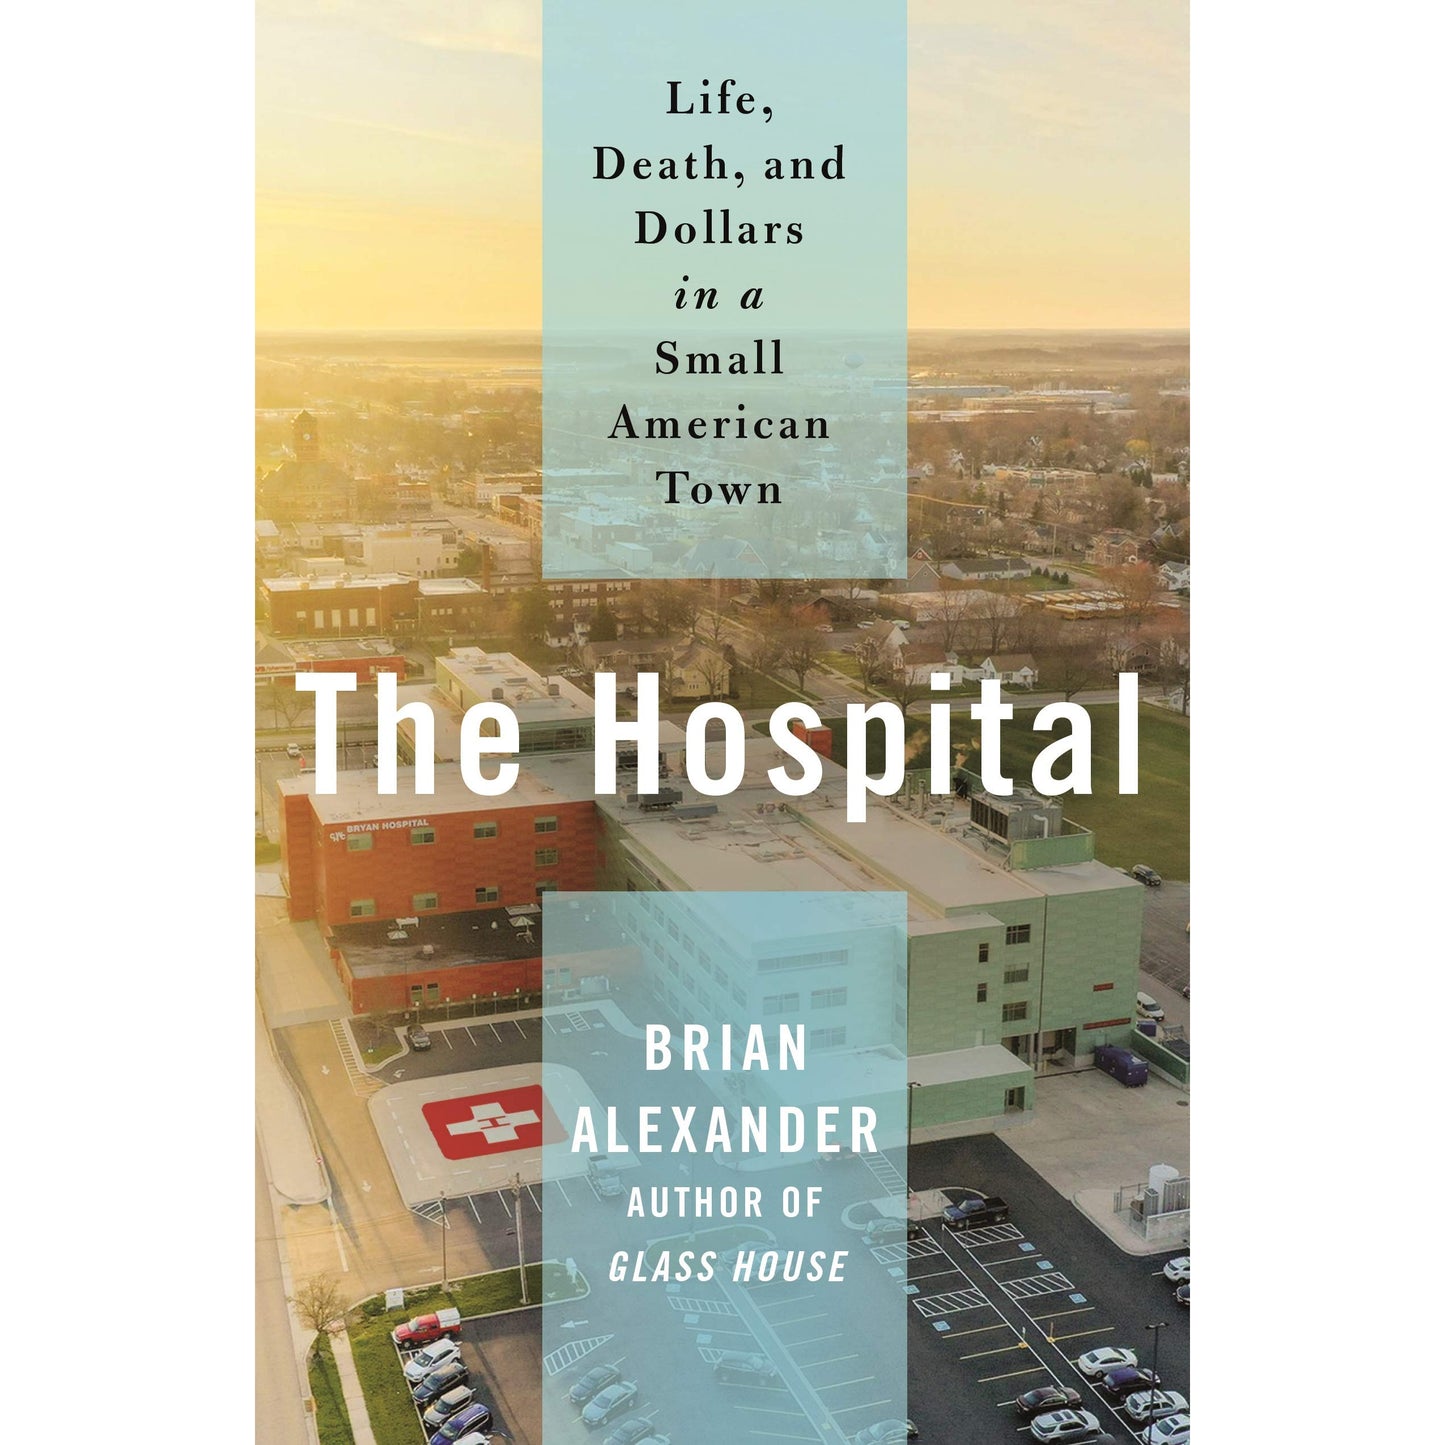 The Hospital: Life, Death and Dollars in a Small American Town by Brian Alexander Hard Cover